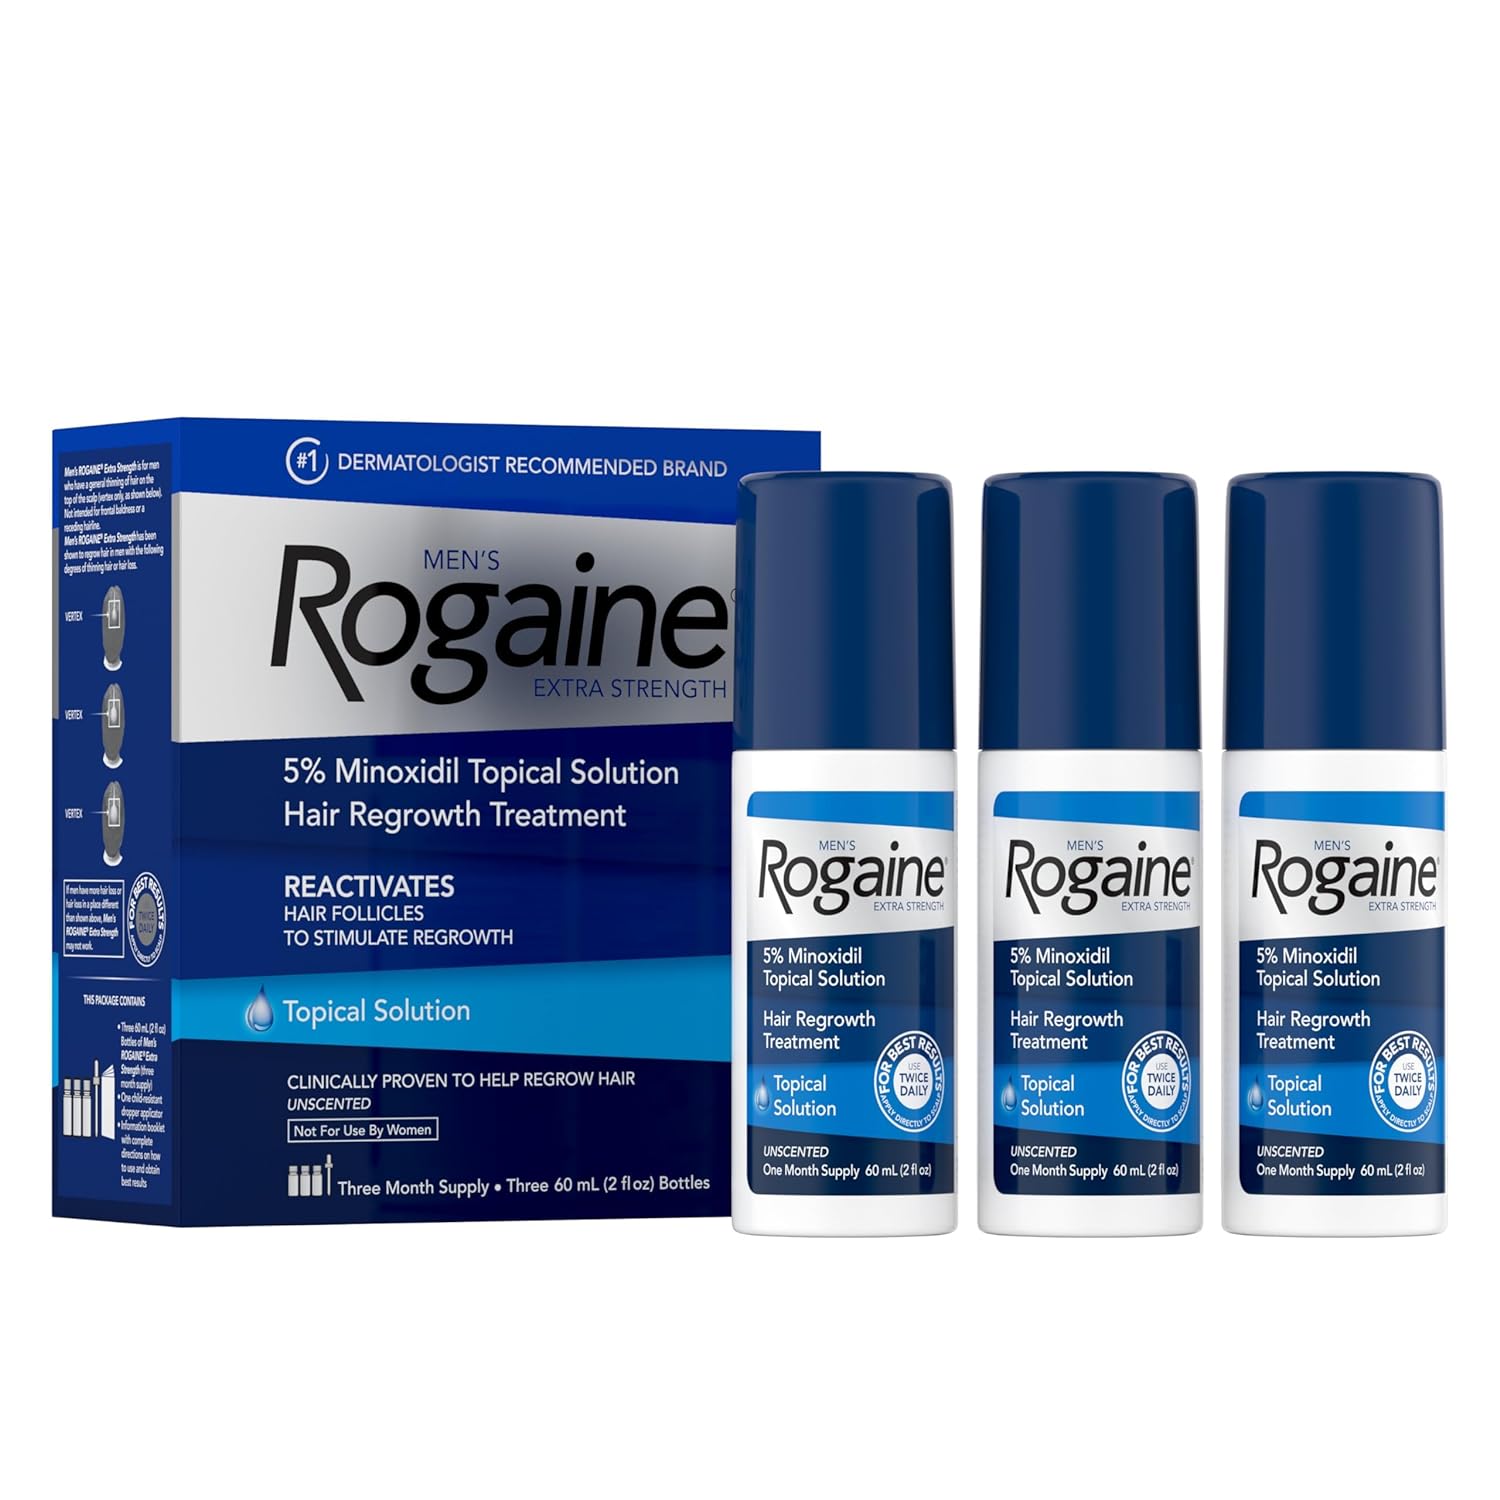 Men's Rogaine Extra Strength 5% Minoxidil Topical Solution for Thin Hair, Hair Loss Treatment to Regrow Fuller, Thicker Hair, 3-Month Supply, 3 x 2 fl. oz